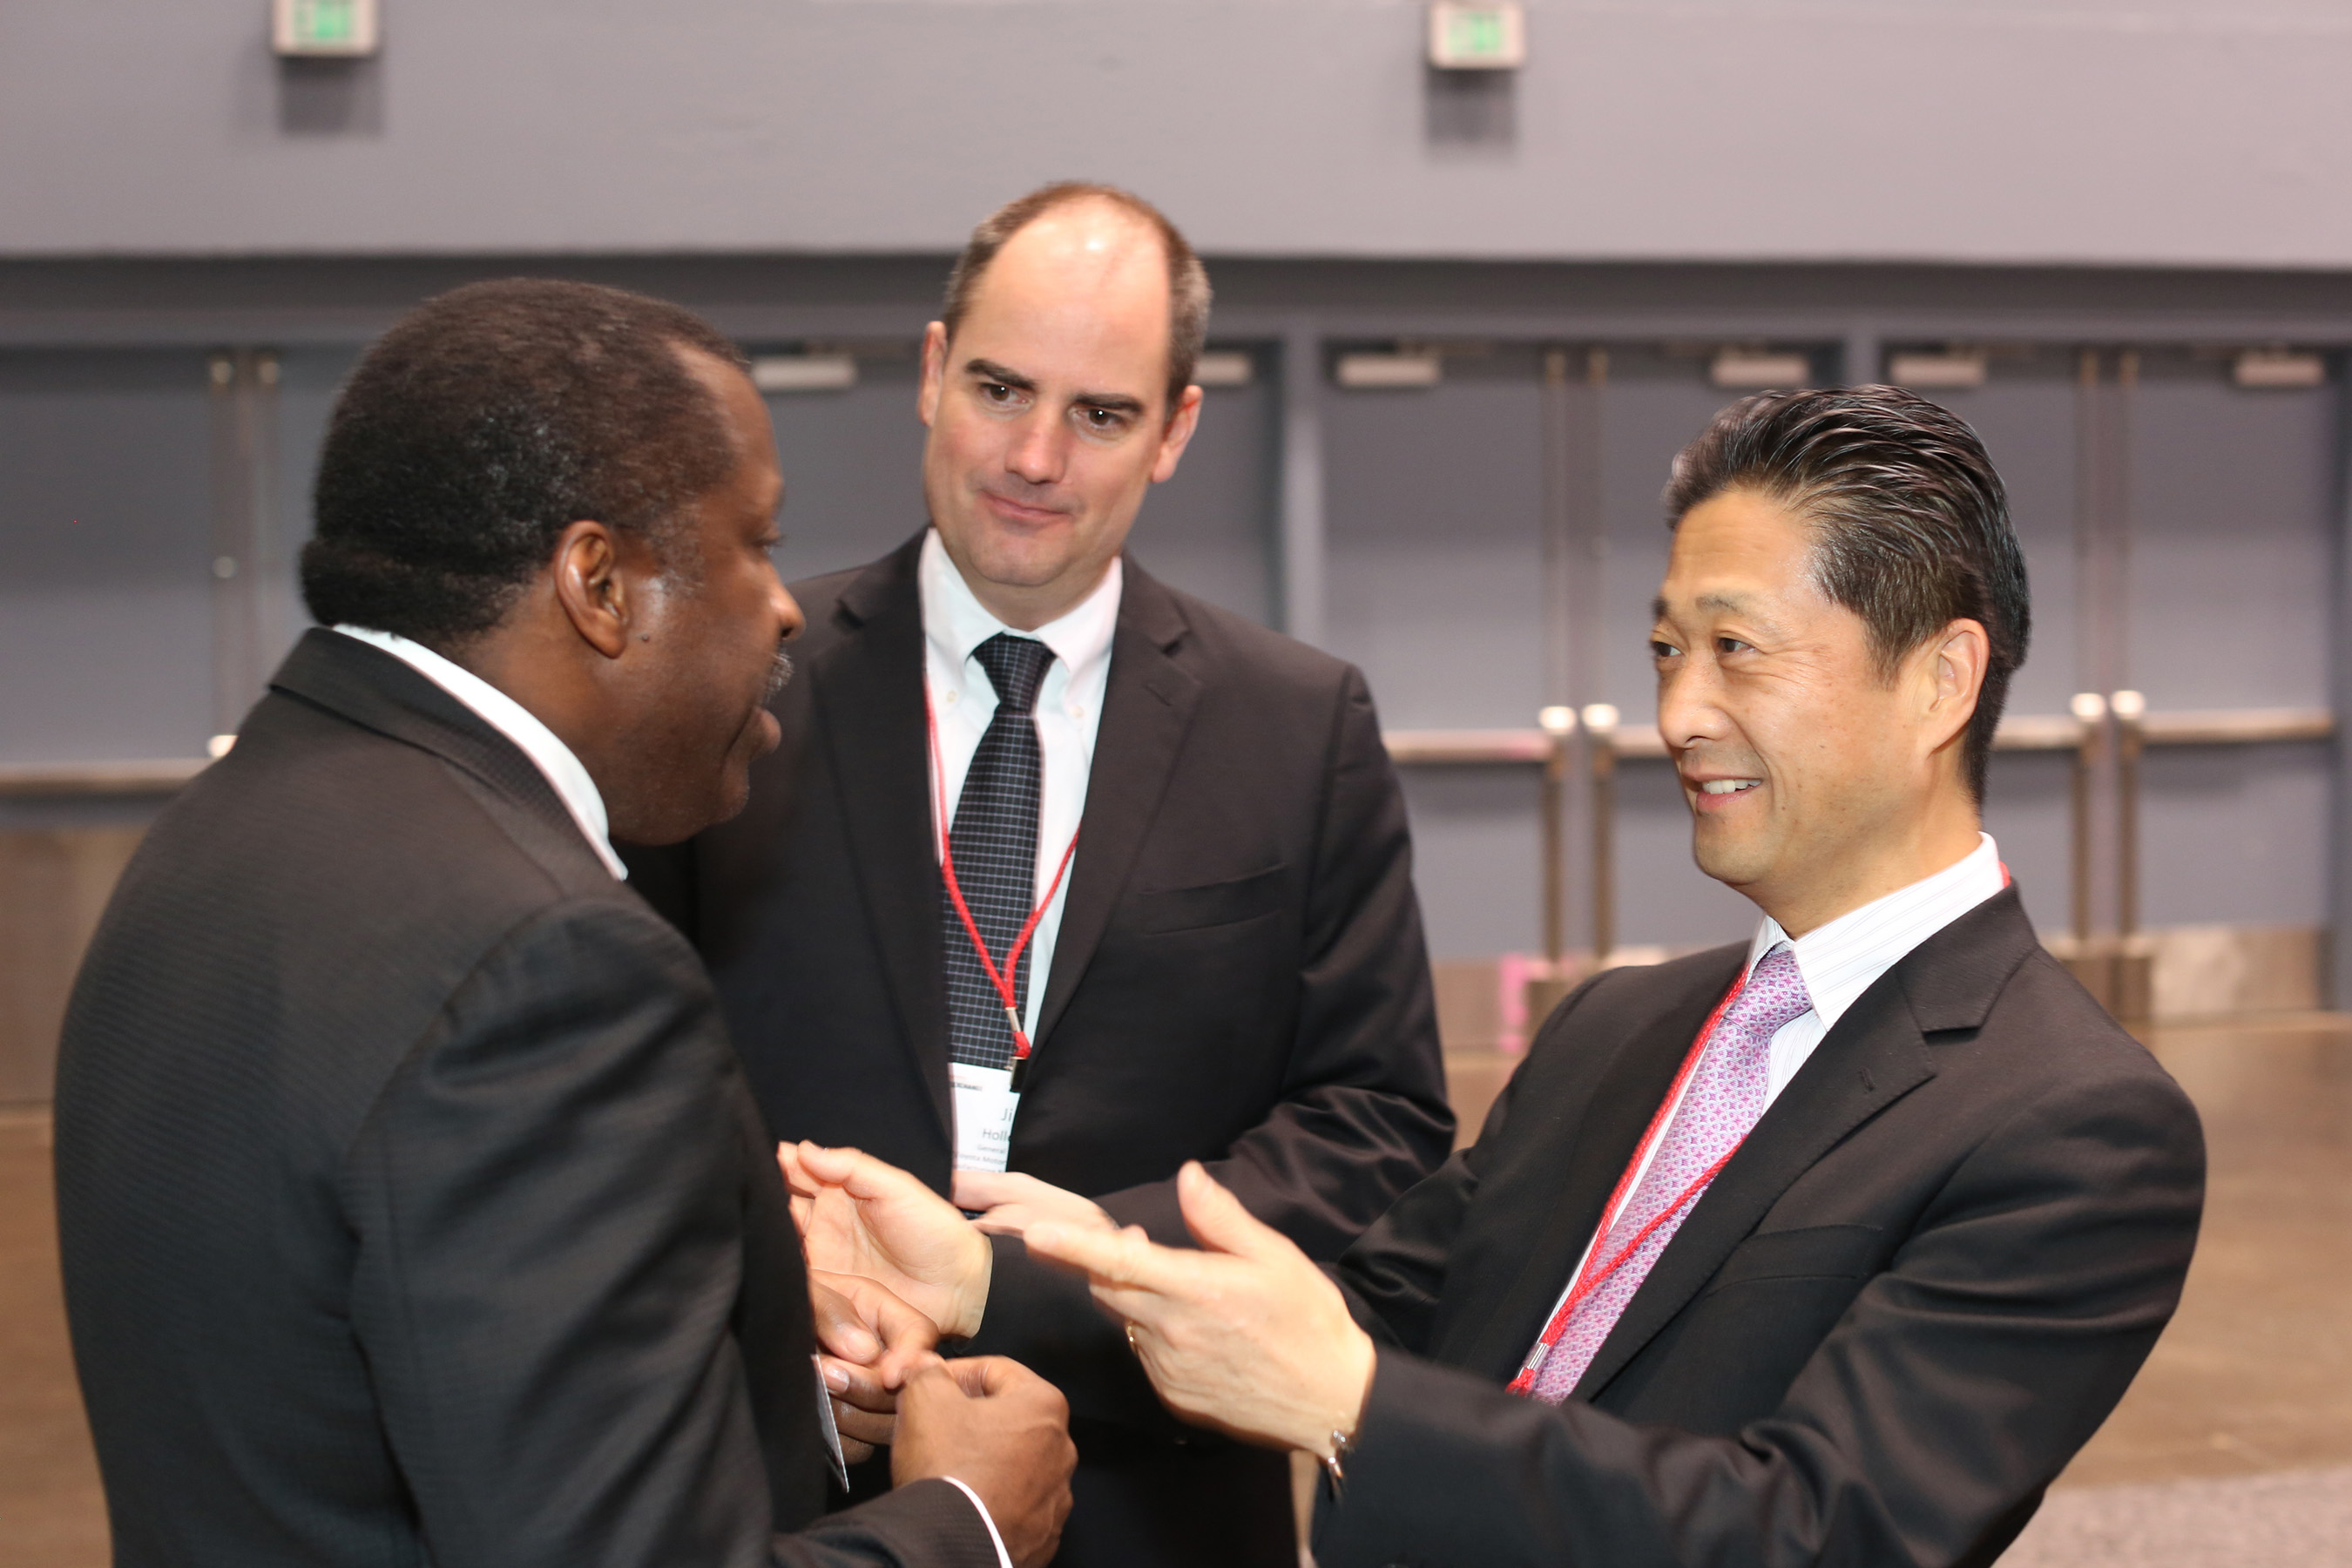 Kevin Shurn, left, owner of Superior Maintenance Co., with Jim Holloway, center, general manager of supplier relations for Toyota Motor Engineering & Manufacturing North America (TEMA), and Osamu “Simon” Nagata, President and CEO, TEMA, at the Toyota Opportunity Exchange.